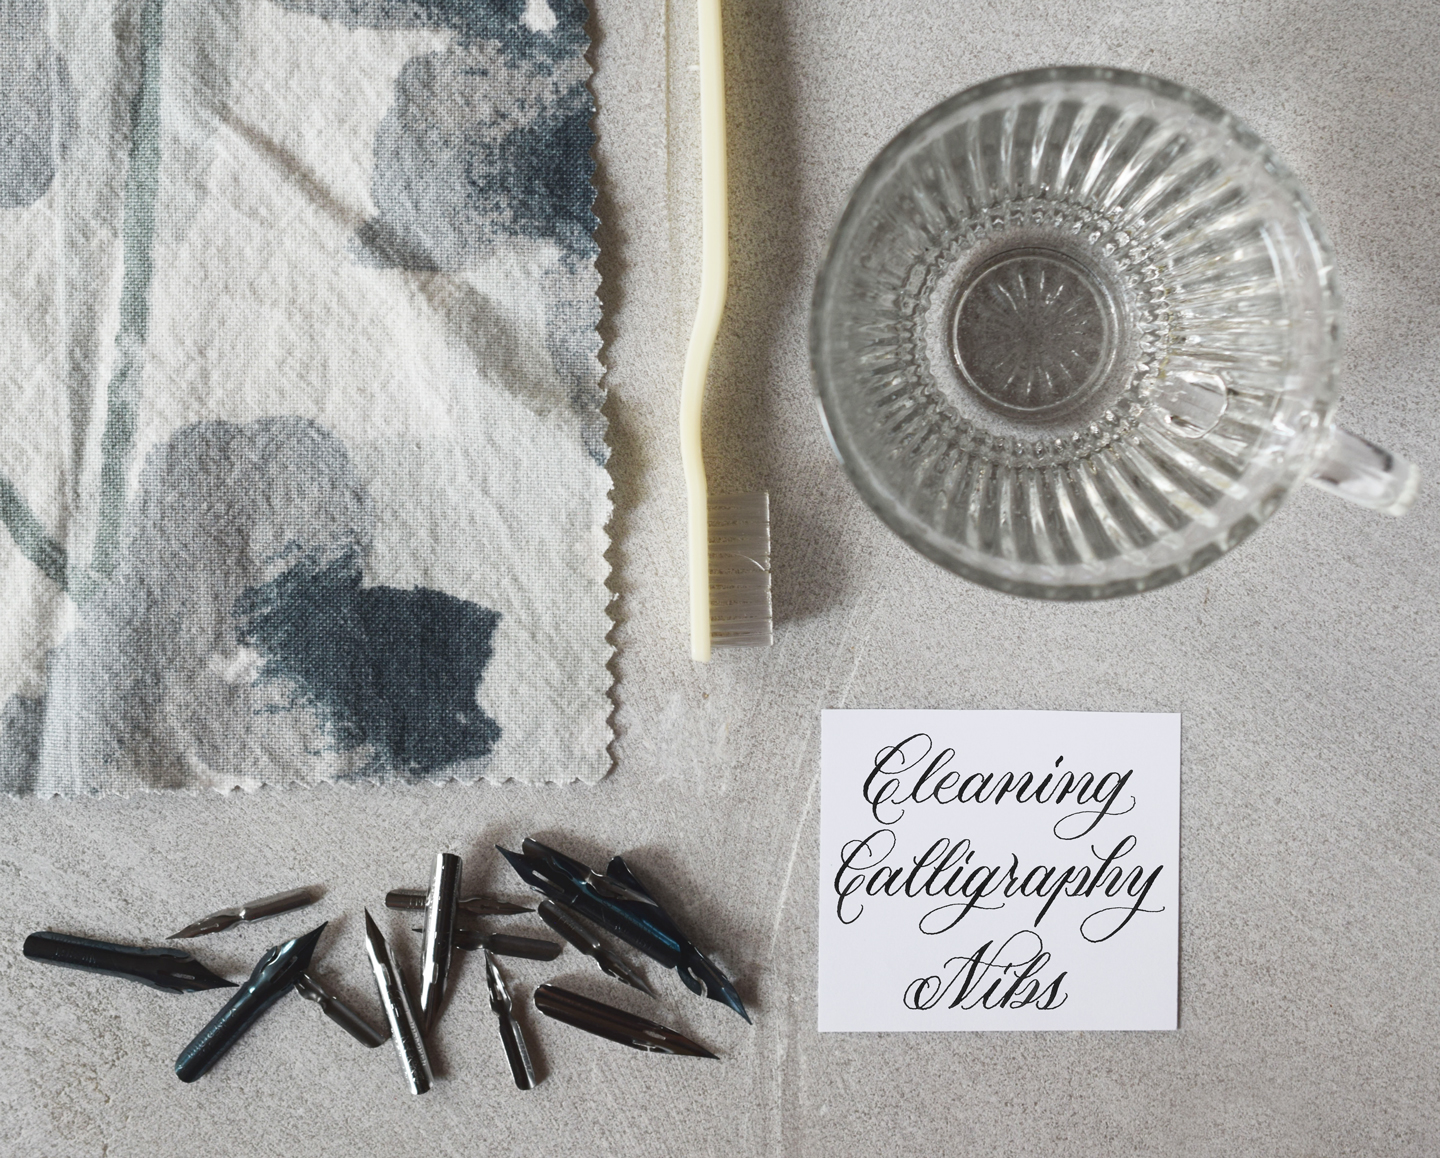 Beginner's Guide To Using Clear Stamps  Full Tutorial, Advice + Cleaning 